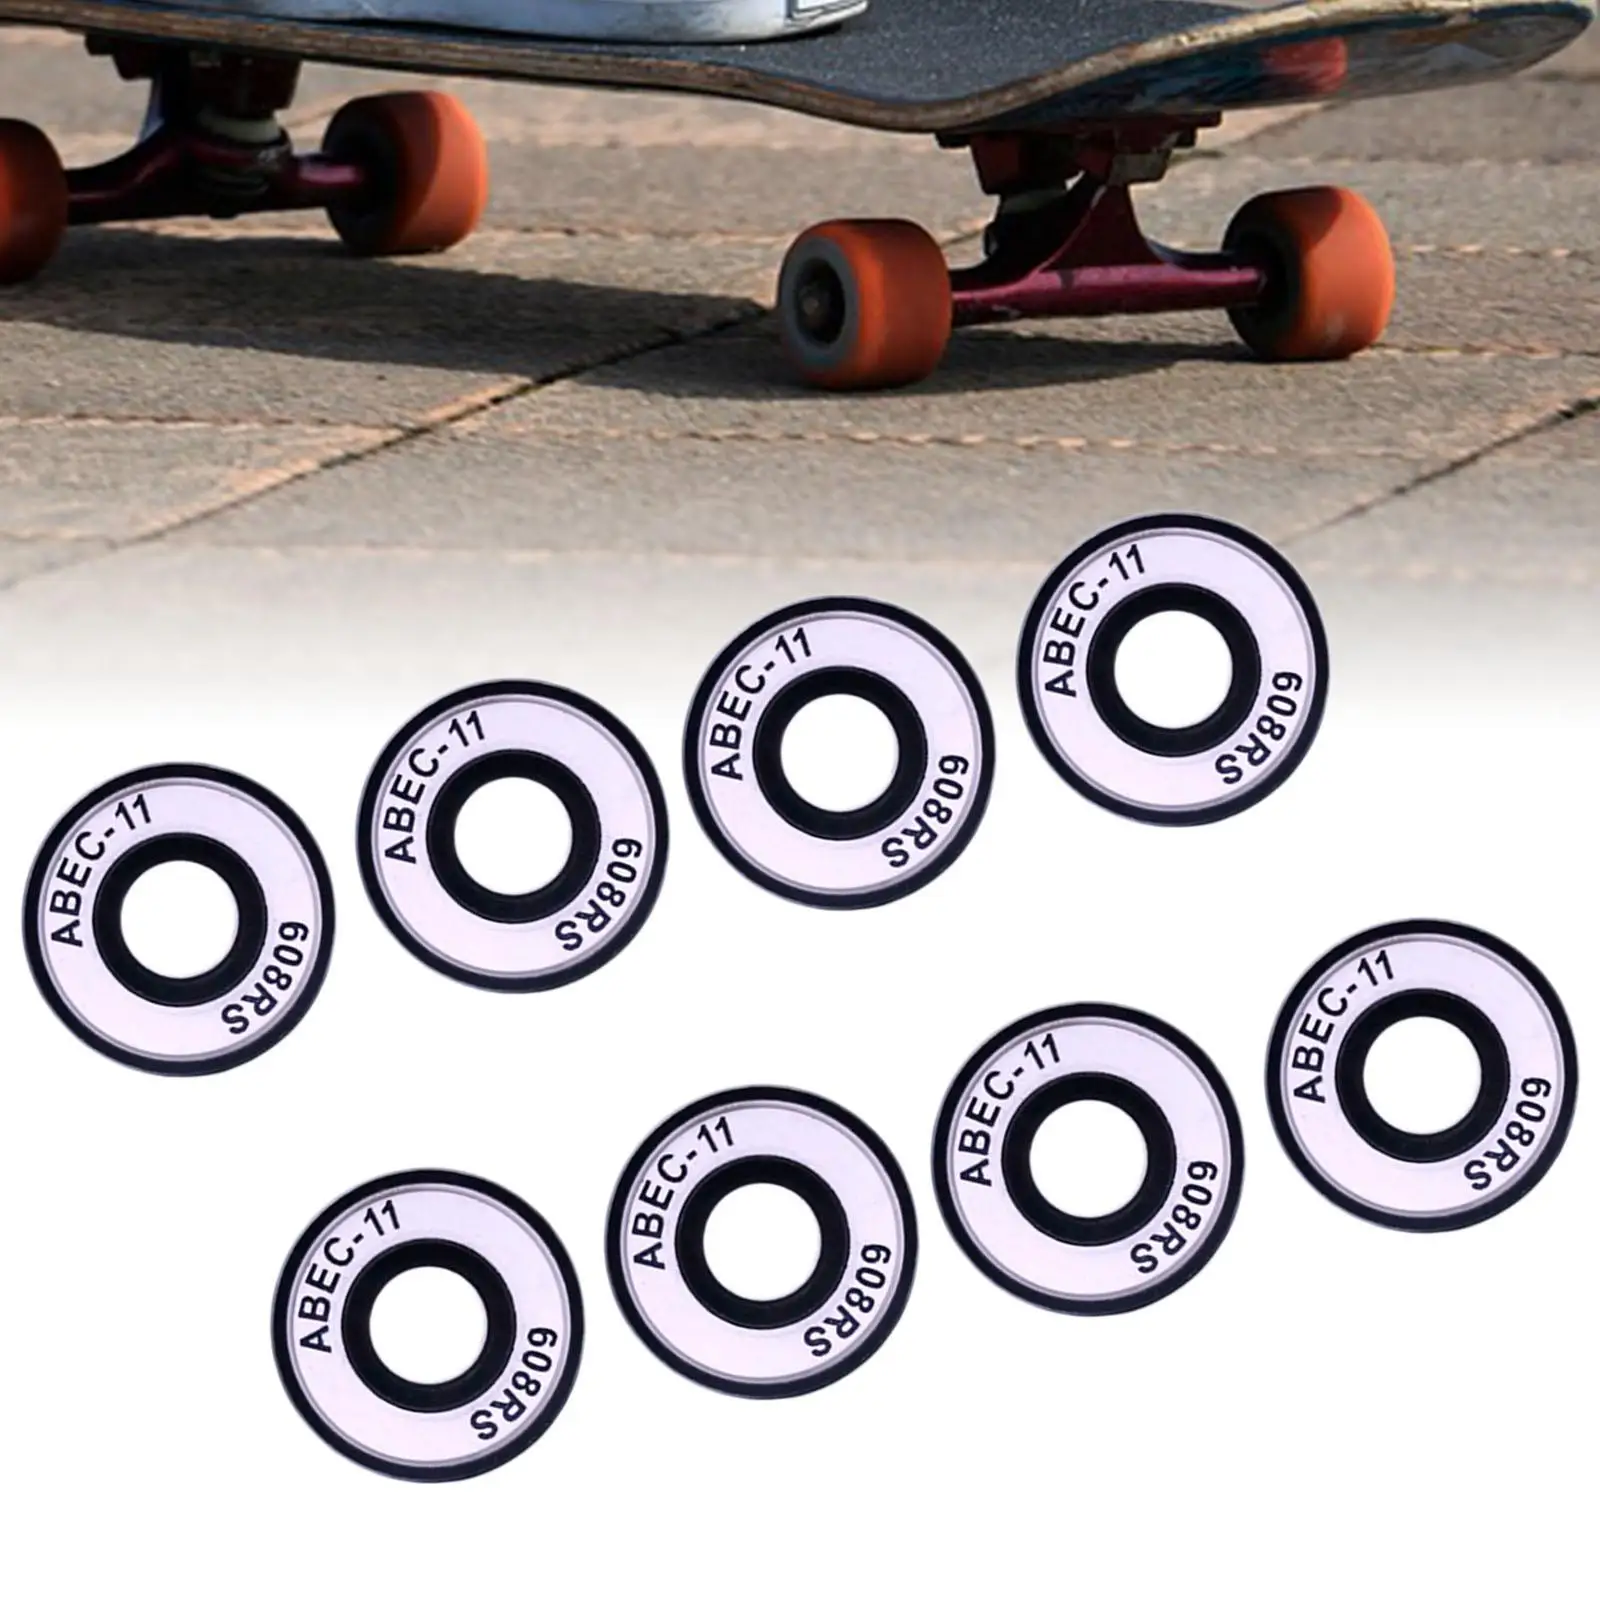 8 Pcs 608-RS Skateboard Bearings High Speed Smooth and Durable, Replace for Longboards, Inline Skates,